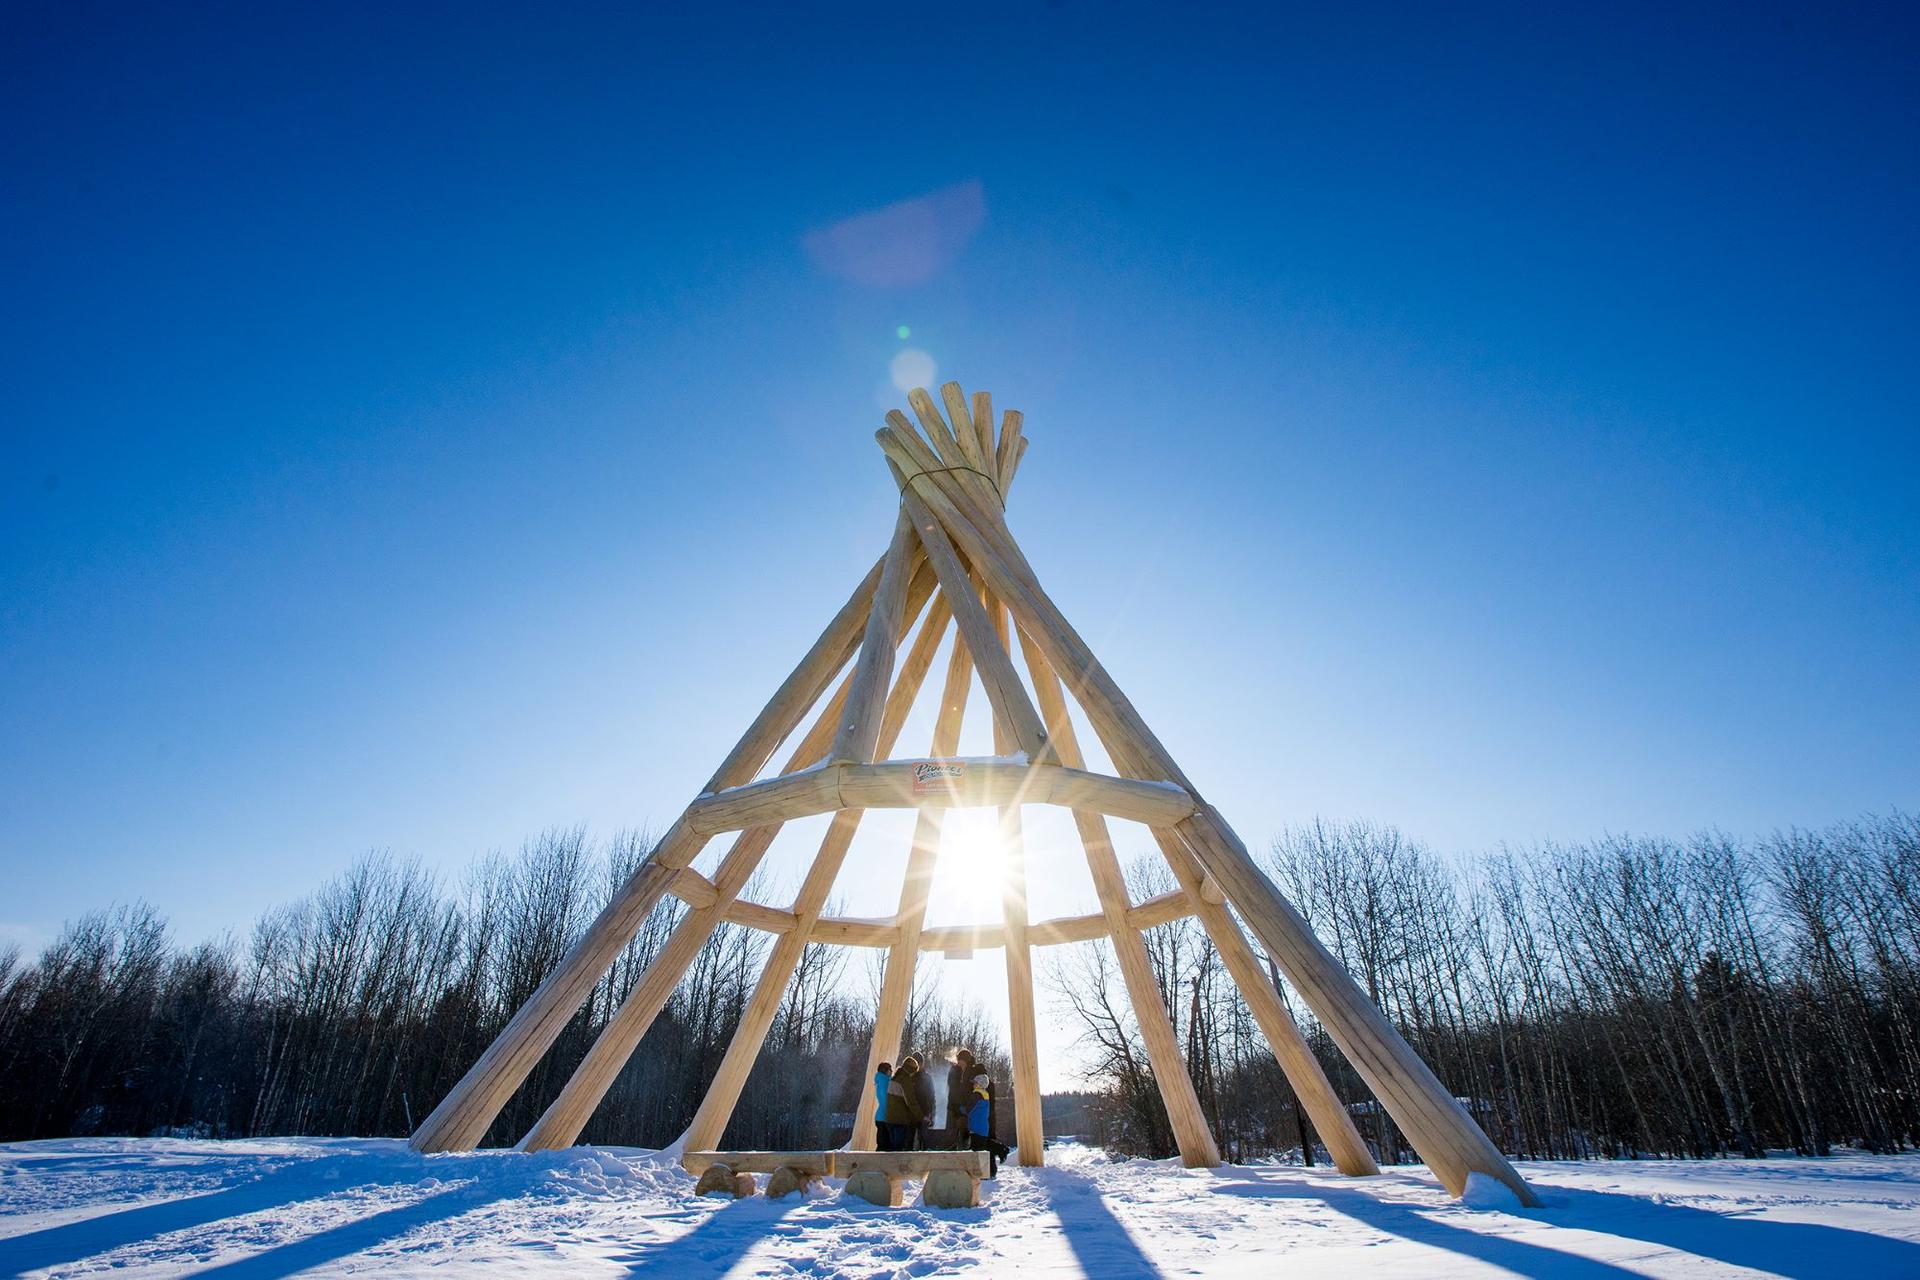 the world's tallest wooden teepee outside with blue sky 